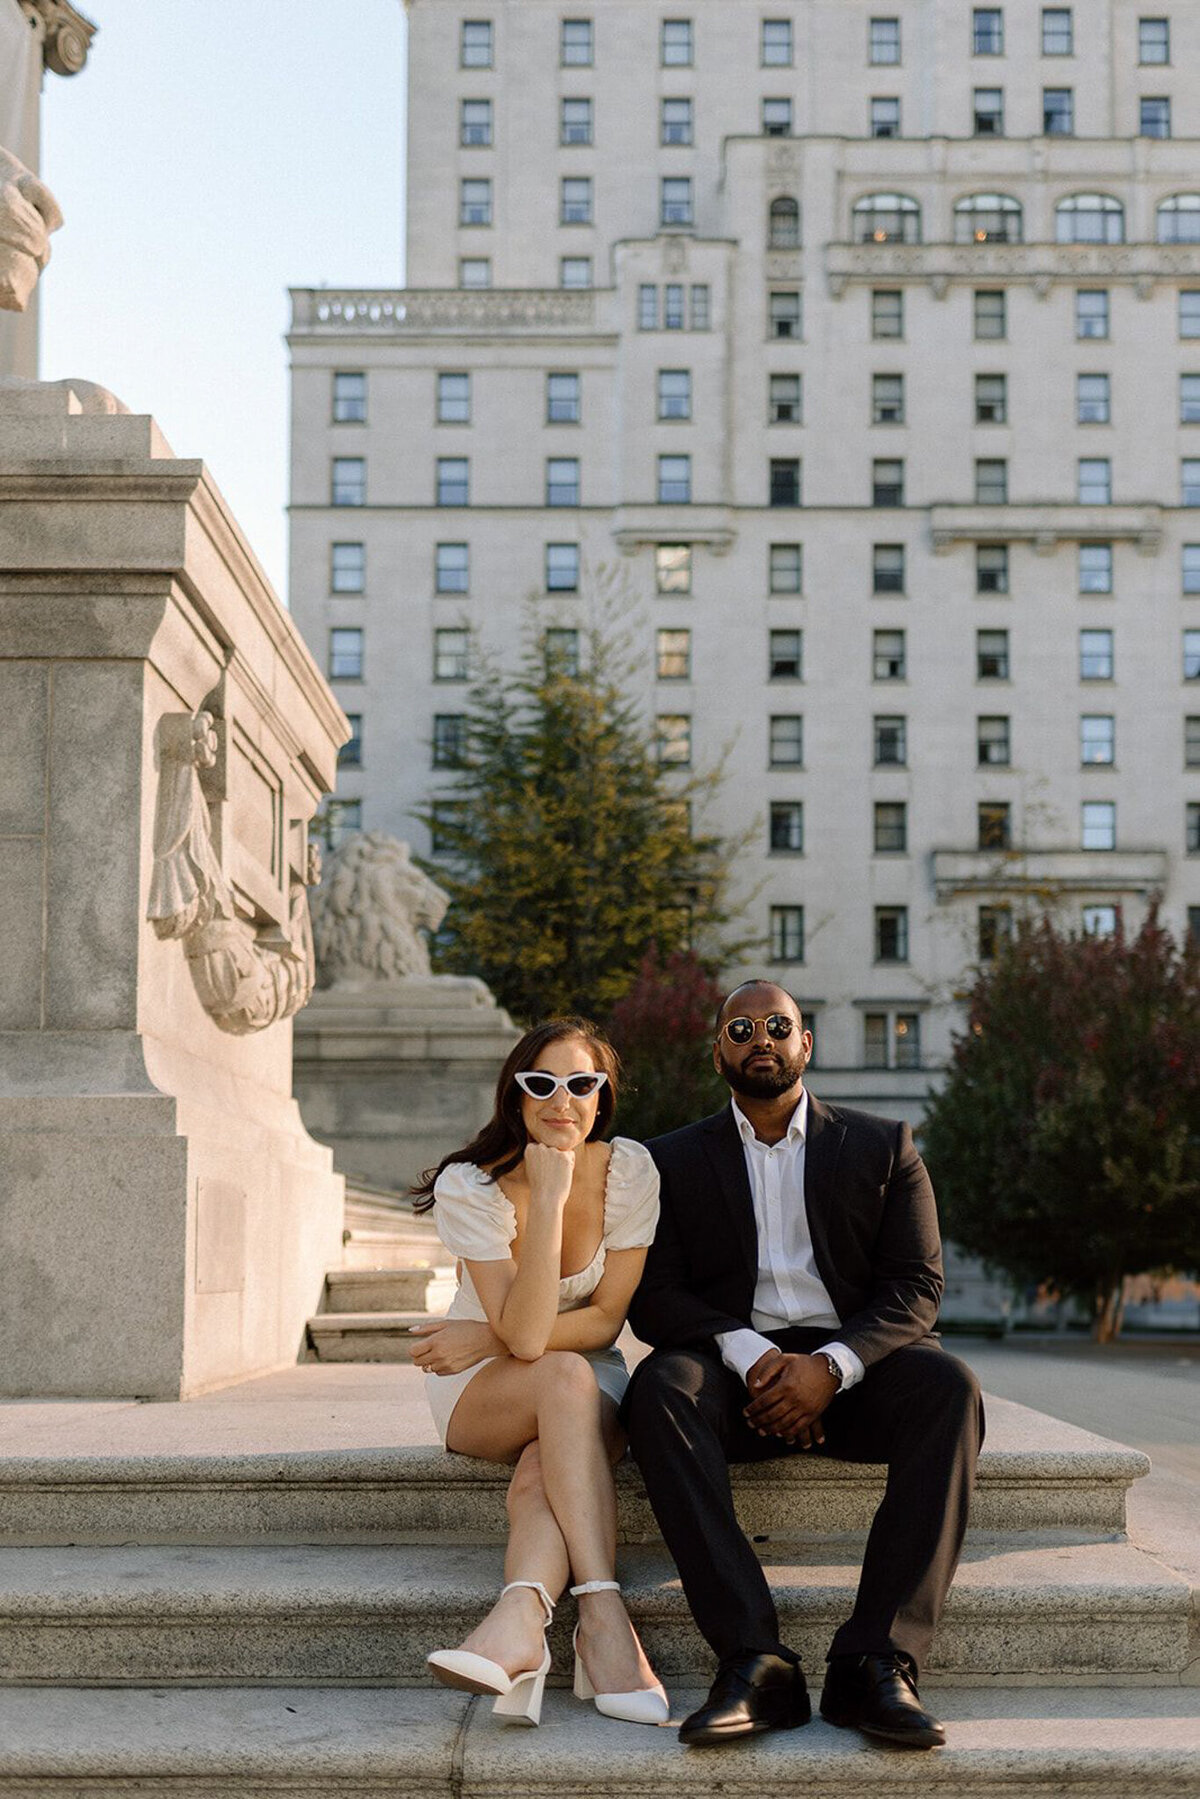 Fun downtown engagement portrait inspiration, captured by Bronte Taylor Photography, a Vancouver-based photographer with a playful, genuine and intimate approach.